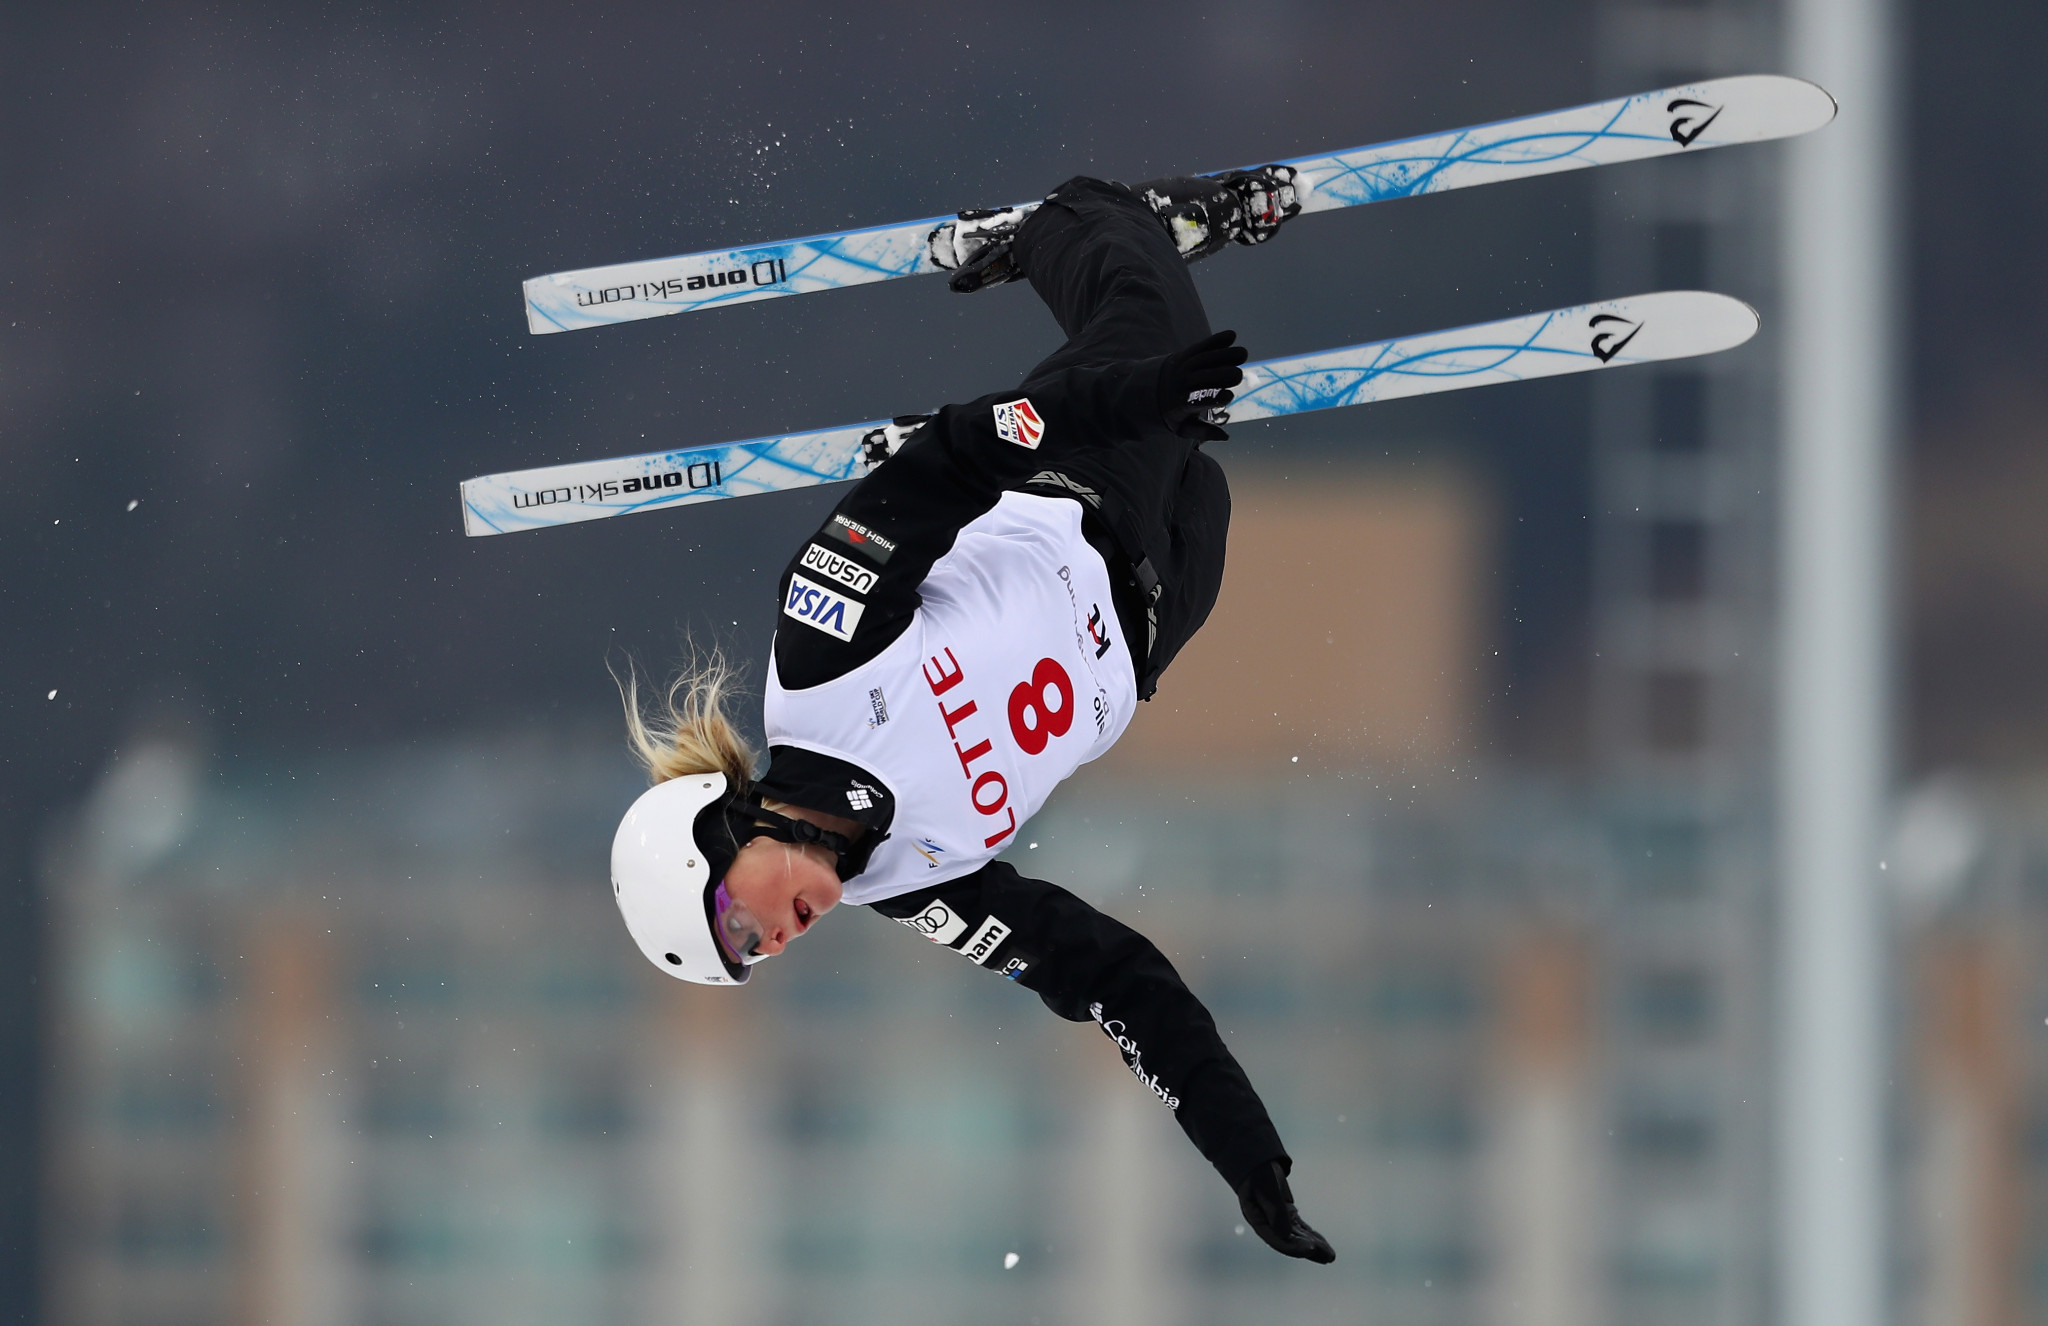 Kiley McKinnon triumphed in the women's event in Moscow ©Getty Images